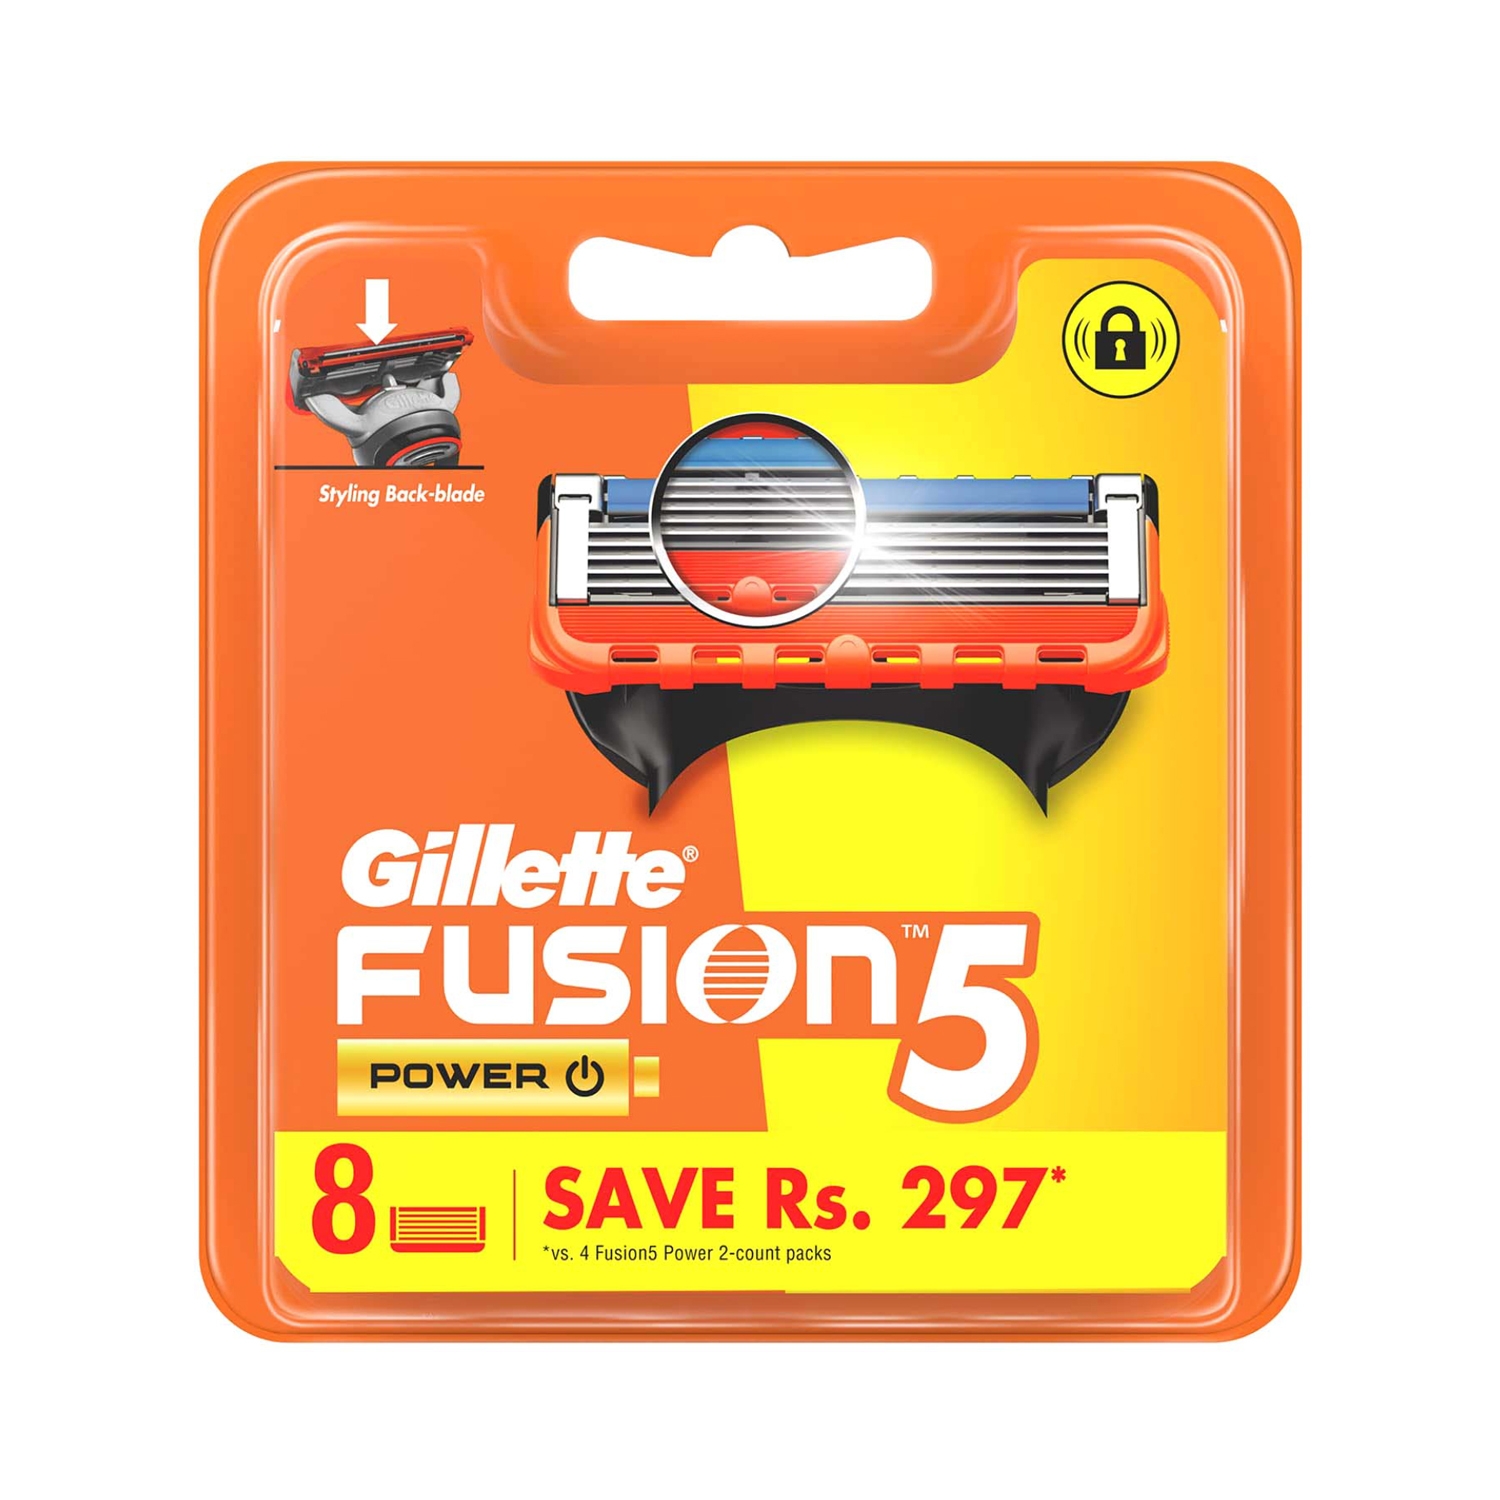 Gillette | Gillette Fusion Power Blades for Men with Styling Back Blade for Perfect Shave and Perfect Beard Shape (8Pcs)